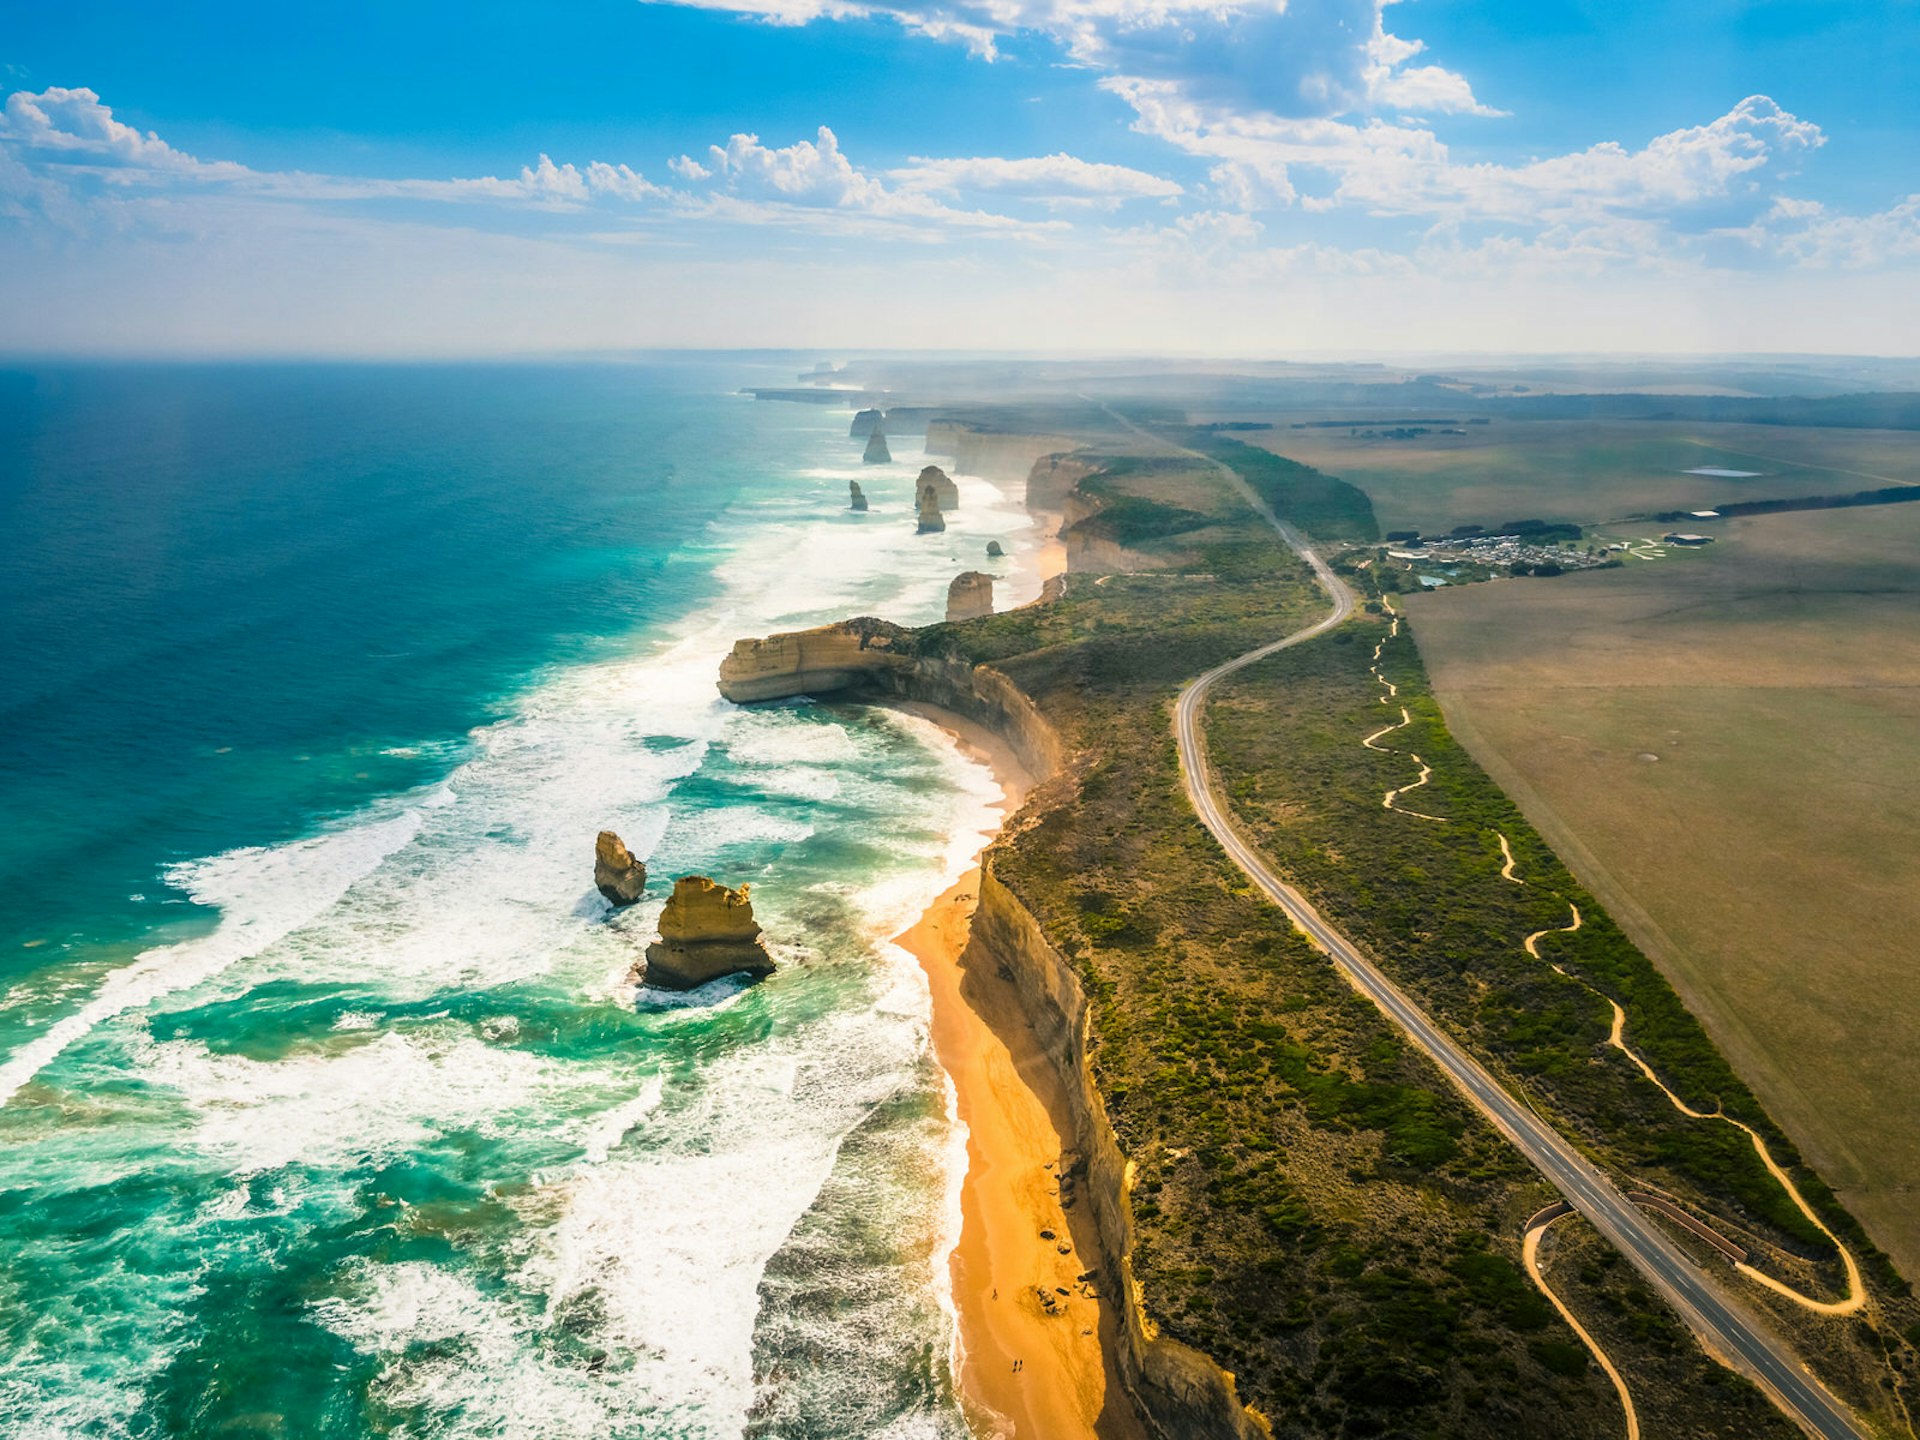 The Great Ocean Road, Australia, shown from above, with the road running alongside the coast